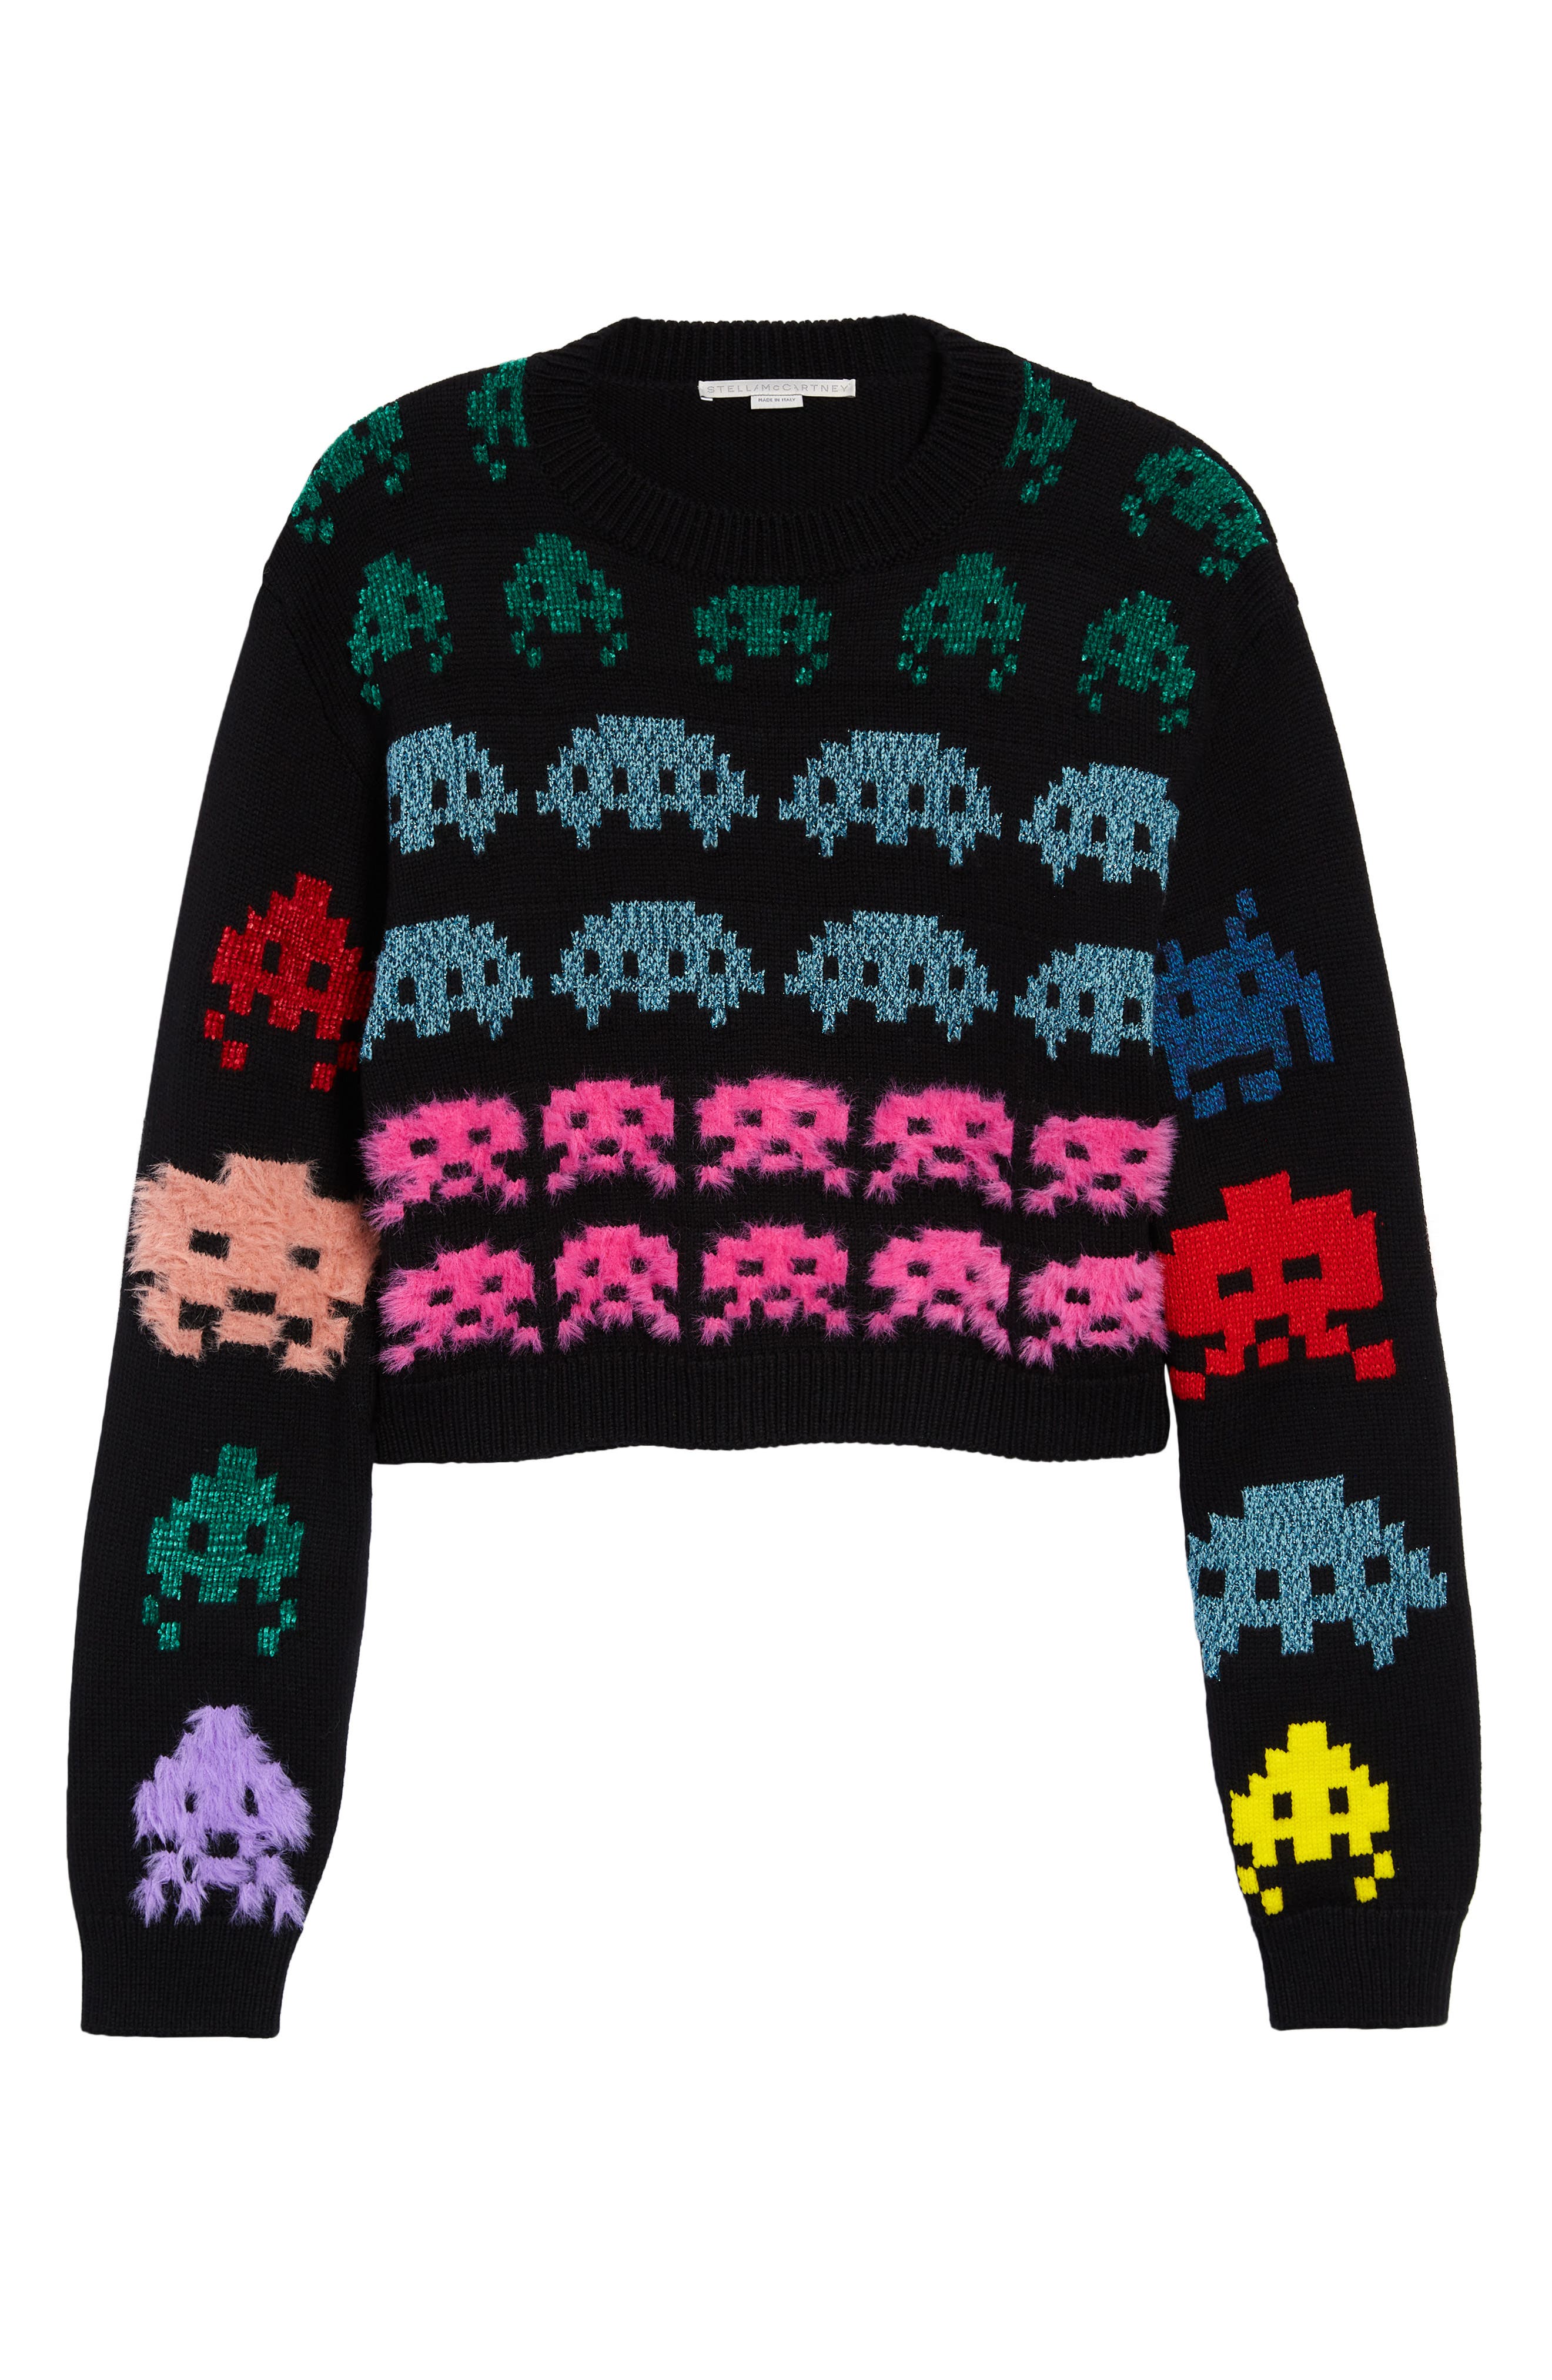 Stella McCartney Game On Crop Sweater in Multicolor at Nordstrom